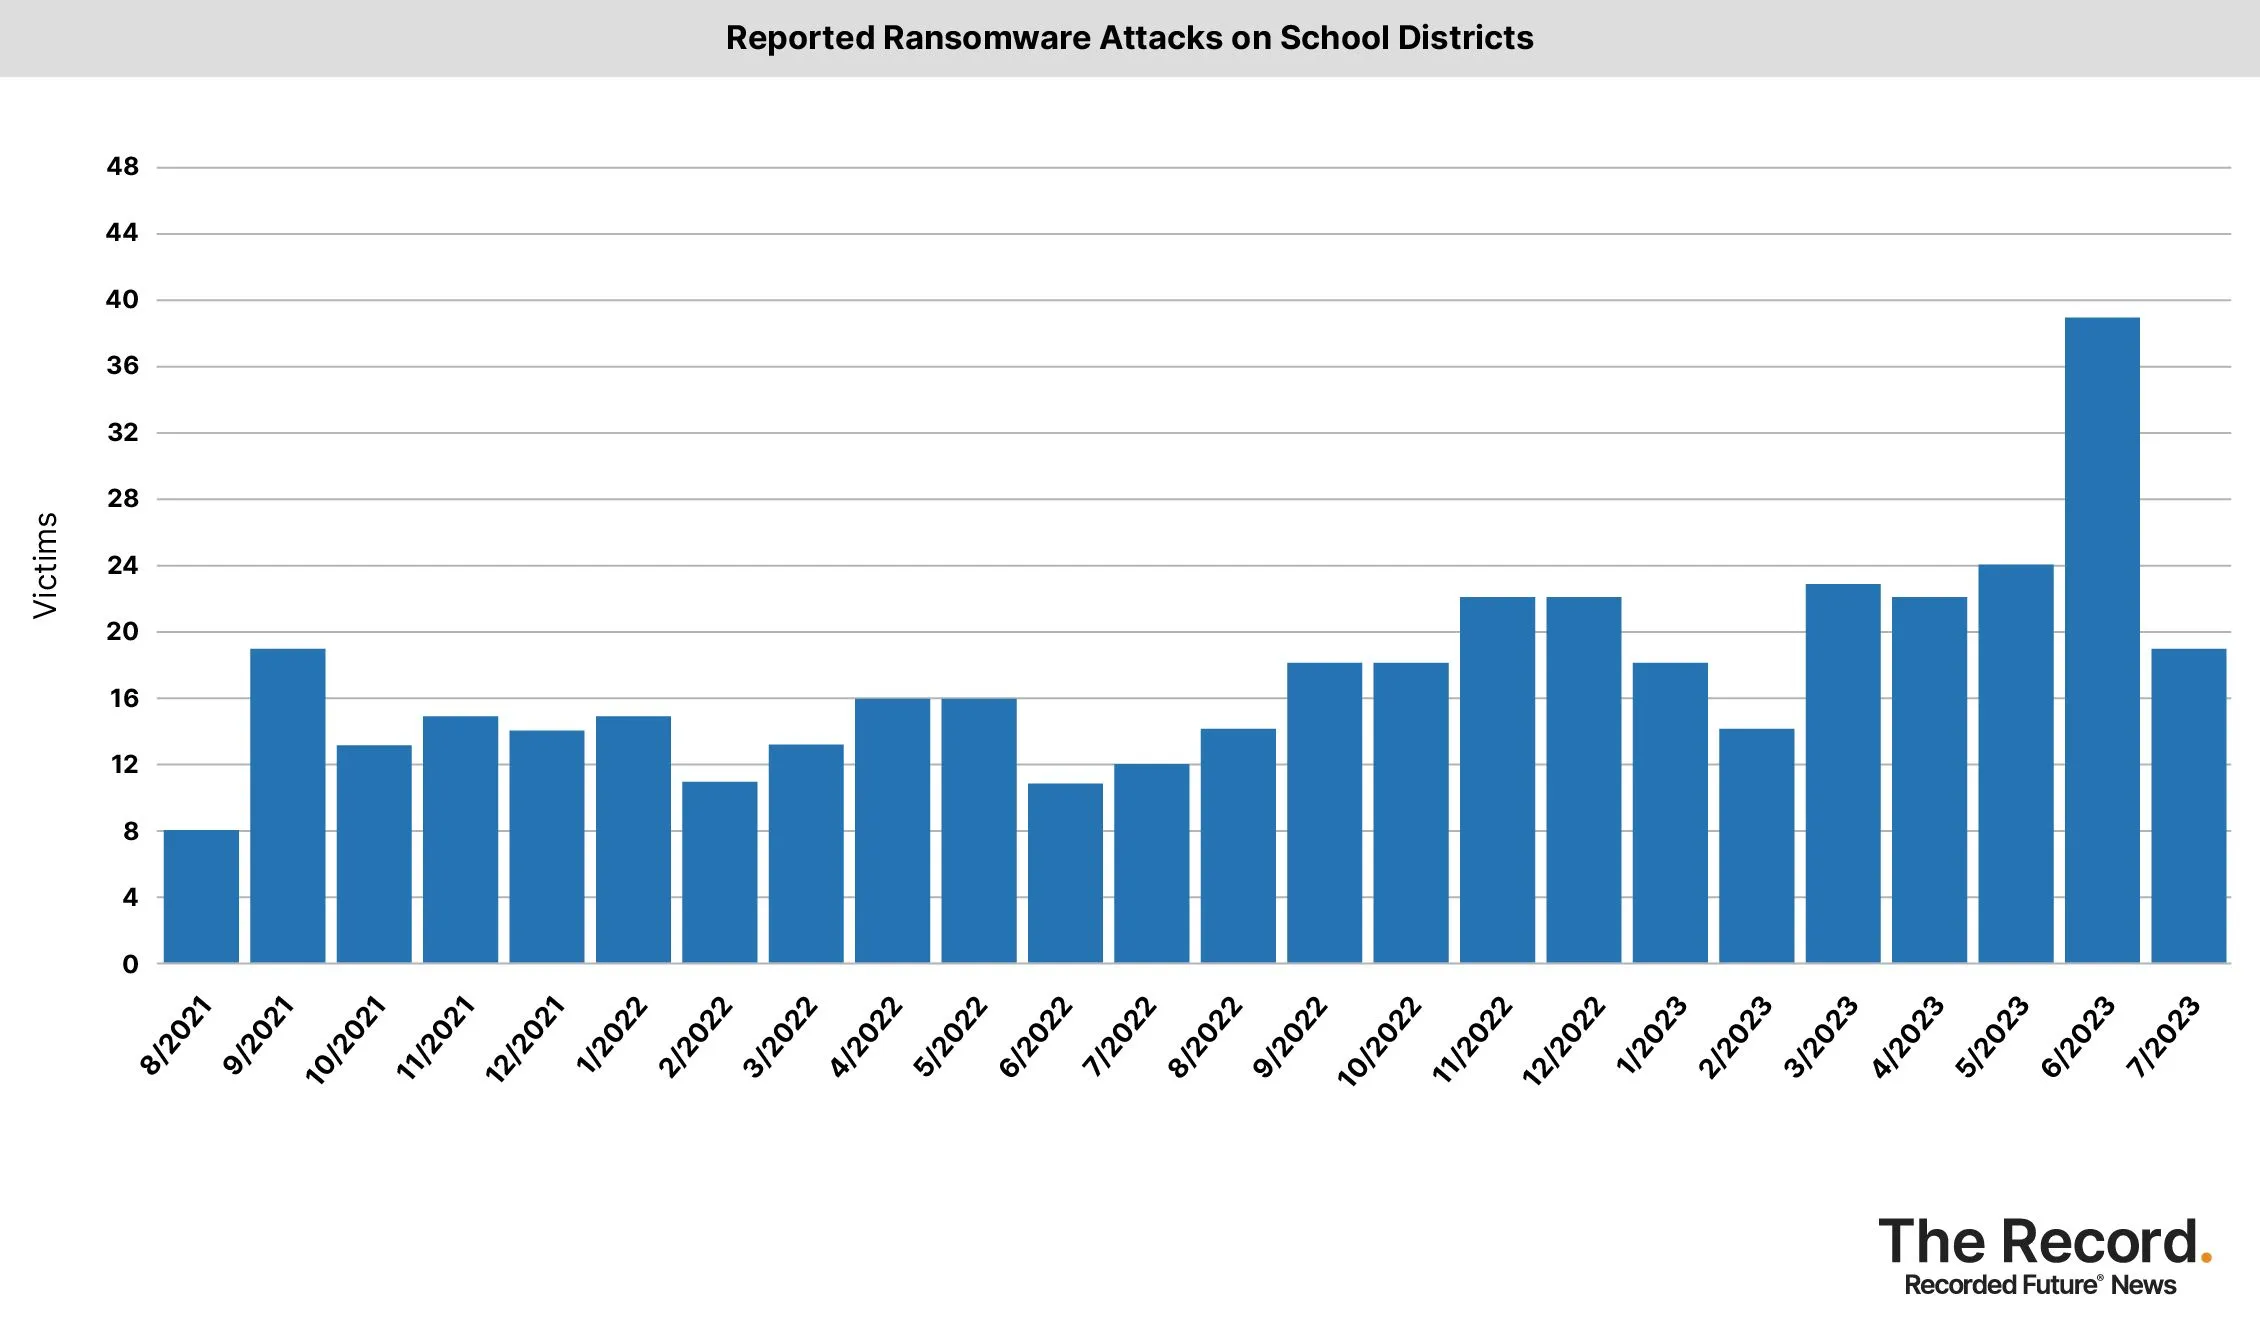 2023_0810 - Ransomware Tracker - Reported Ransomware Attacks on School Districts.jpg